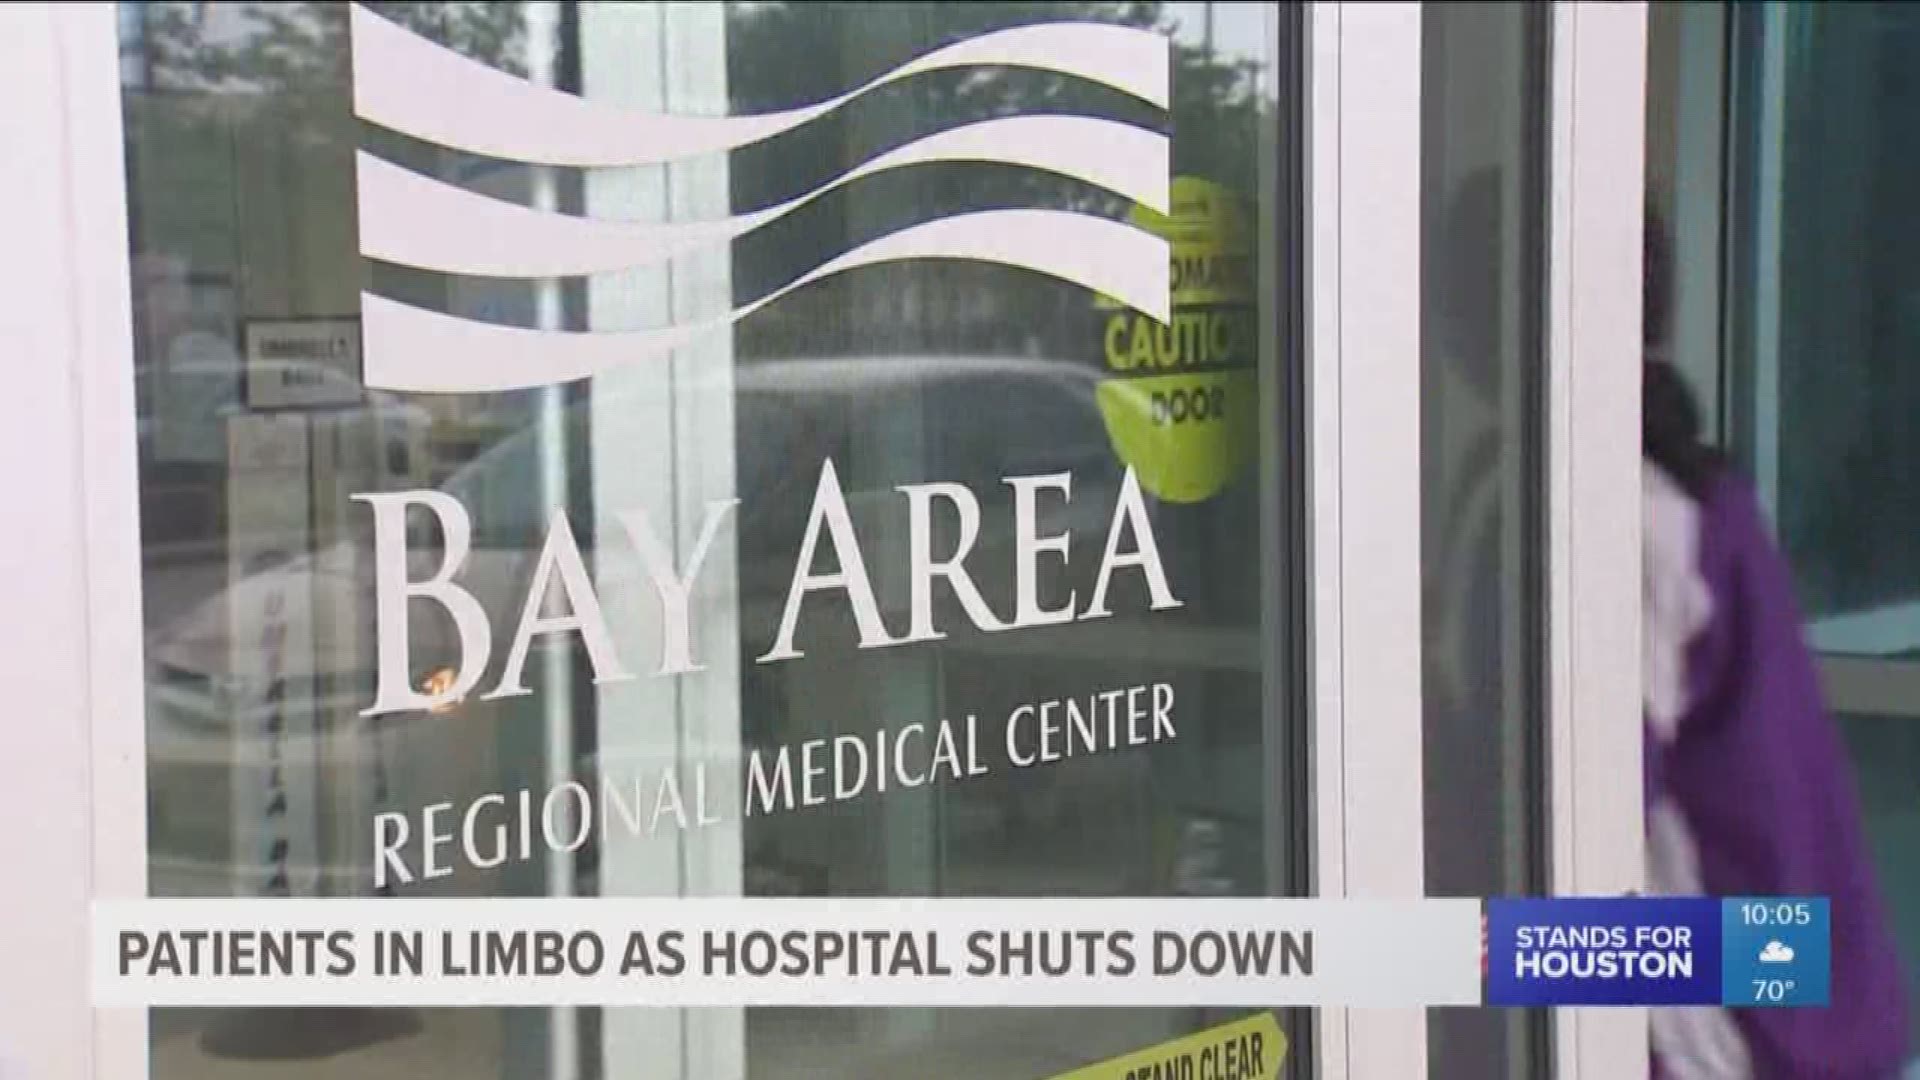 Employees working the night shift at Bay Area Medical Center Friday were surprised to find out they would be out of jobs come Monday after the hospital announced closure and filed for bankruptcy.